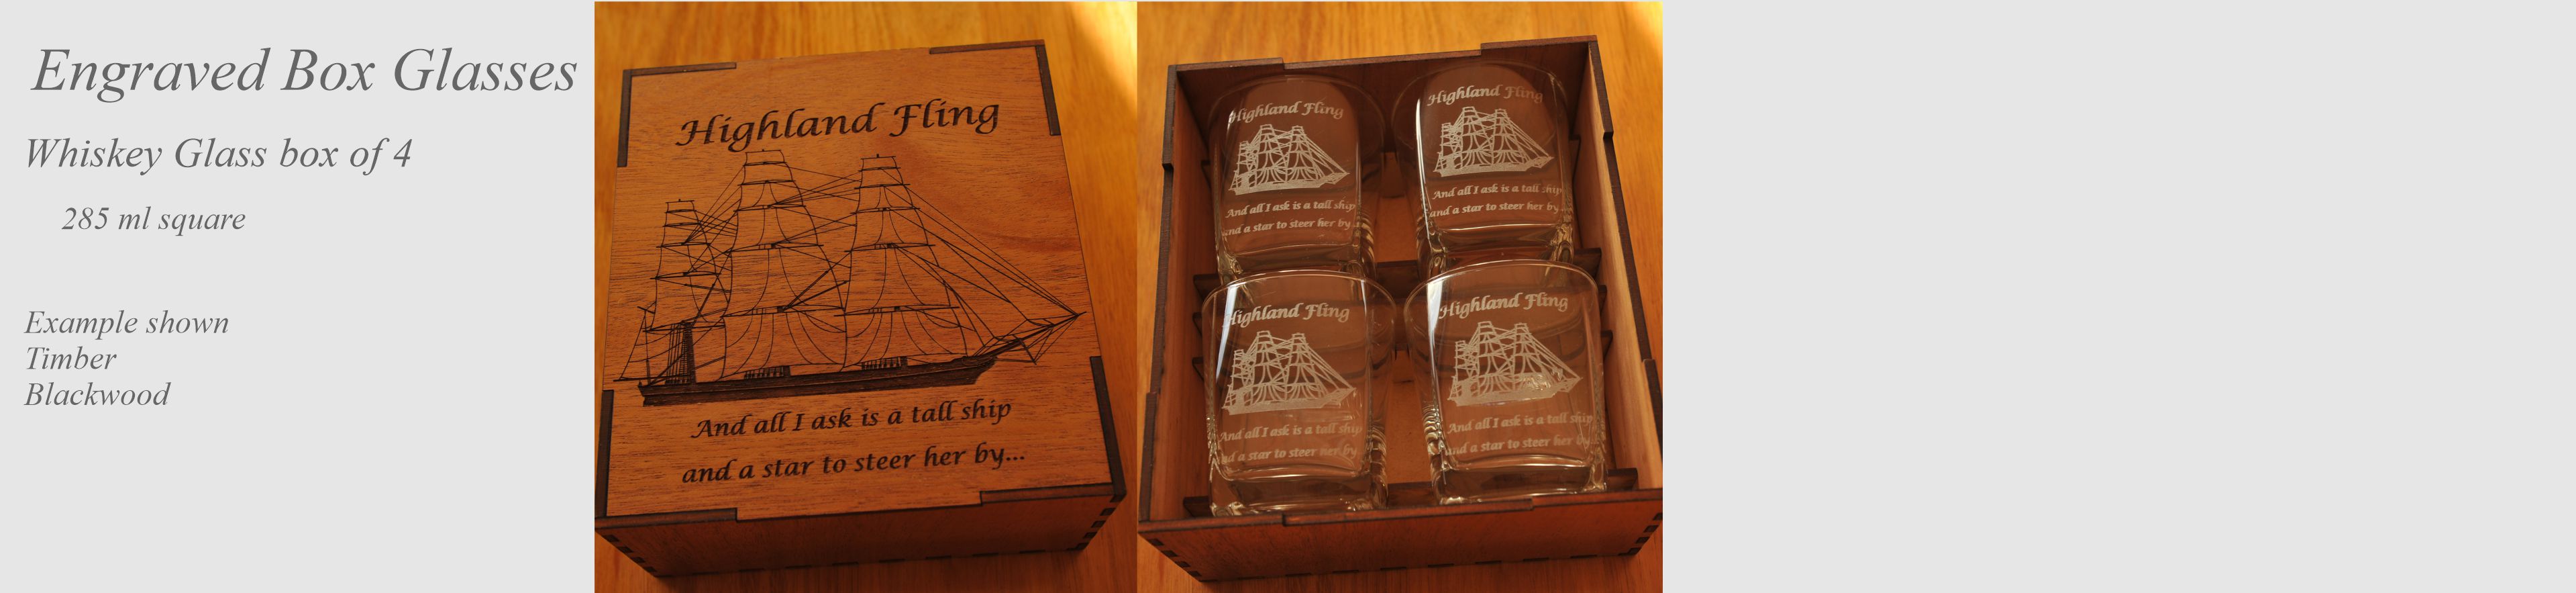 Whisky glass set 4 in engraved box set